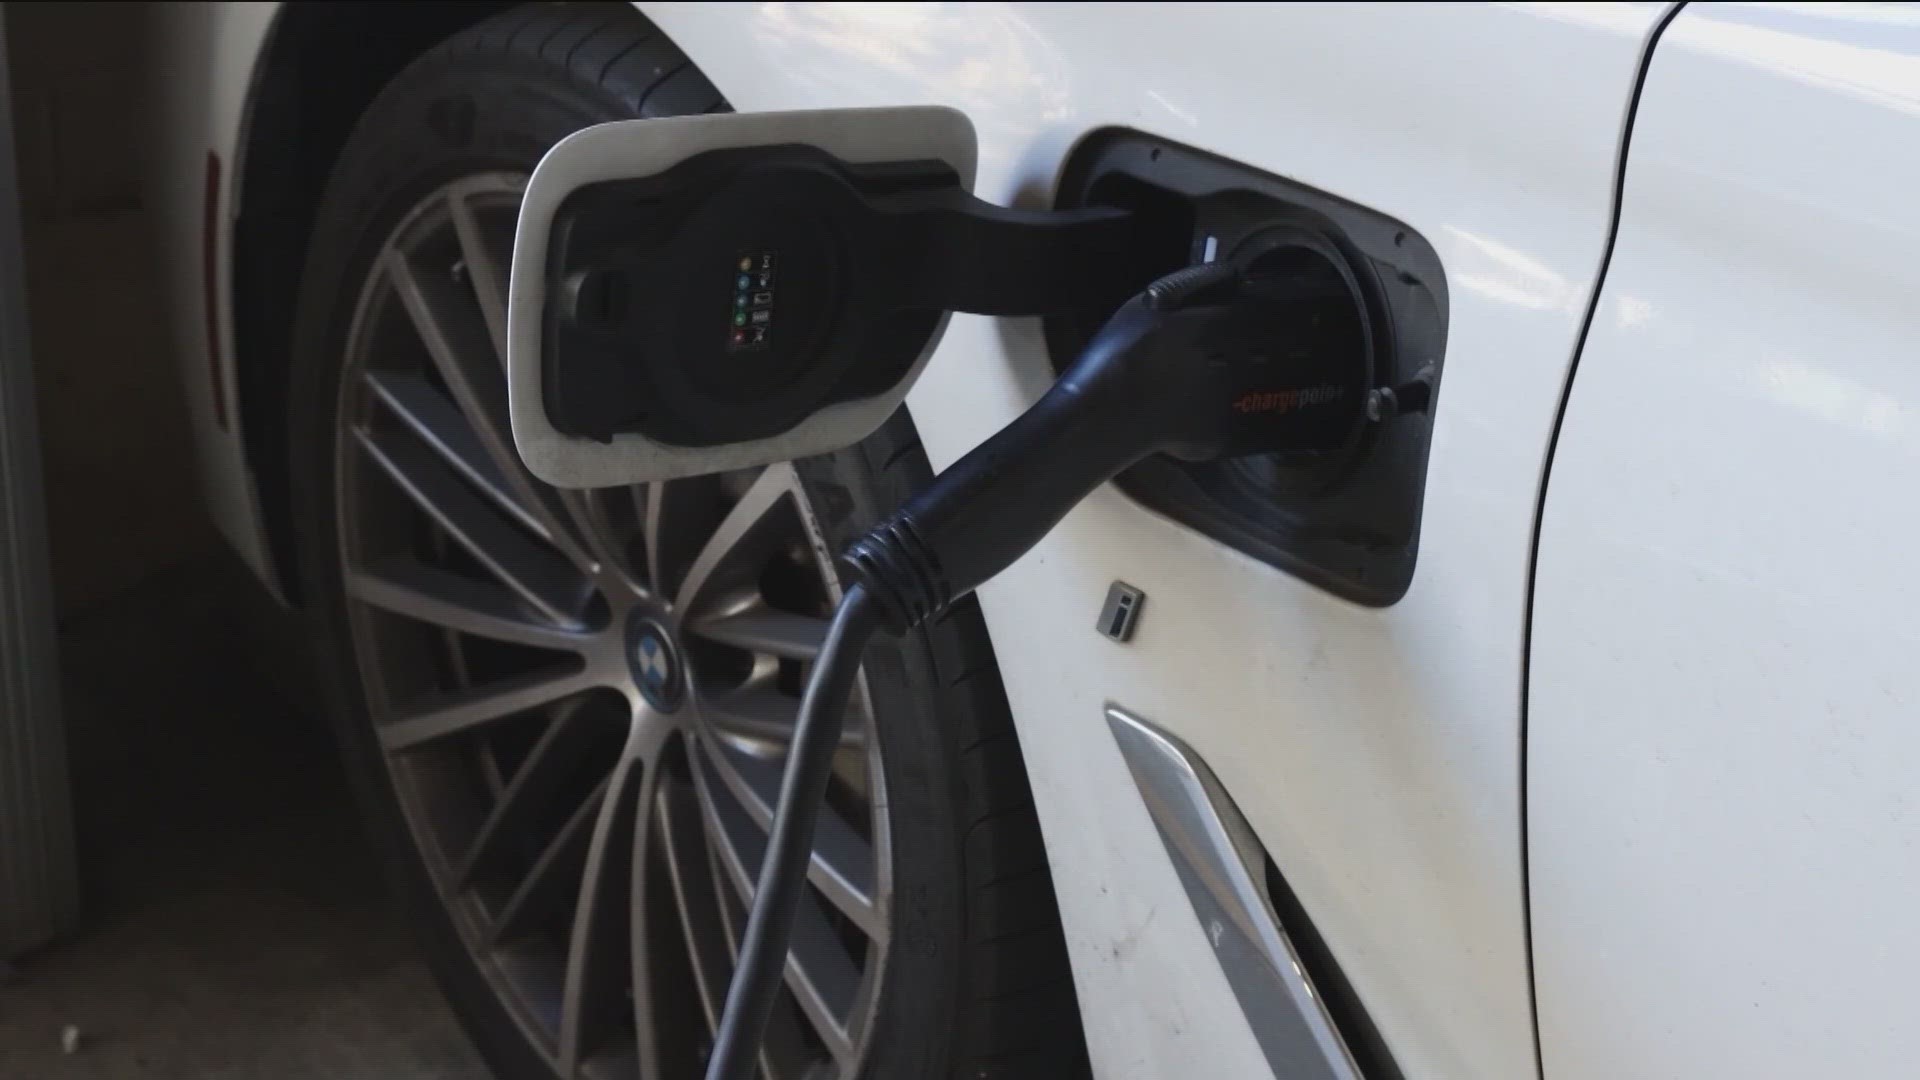 Texas ranks 40th among states for electric vehicle infrastructure.